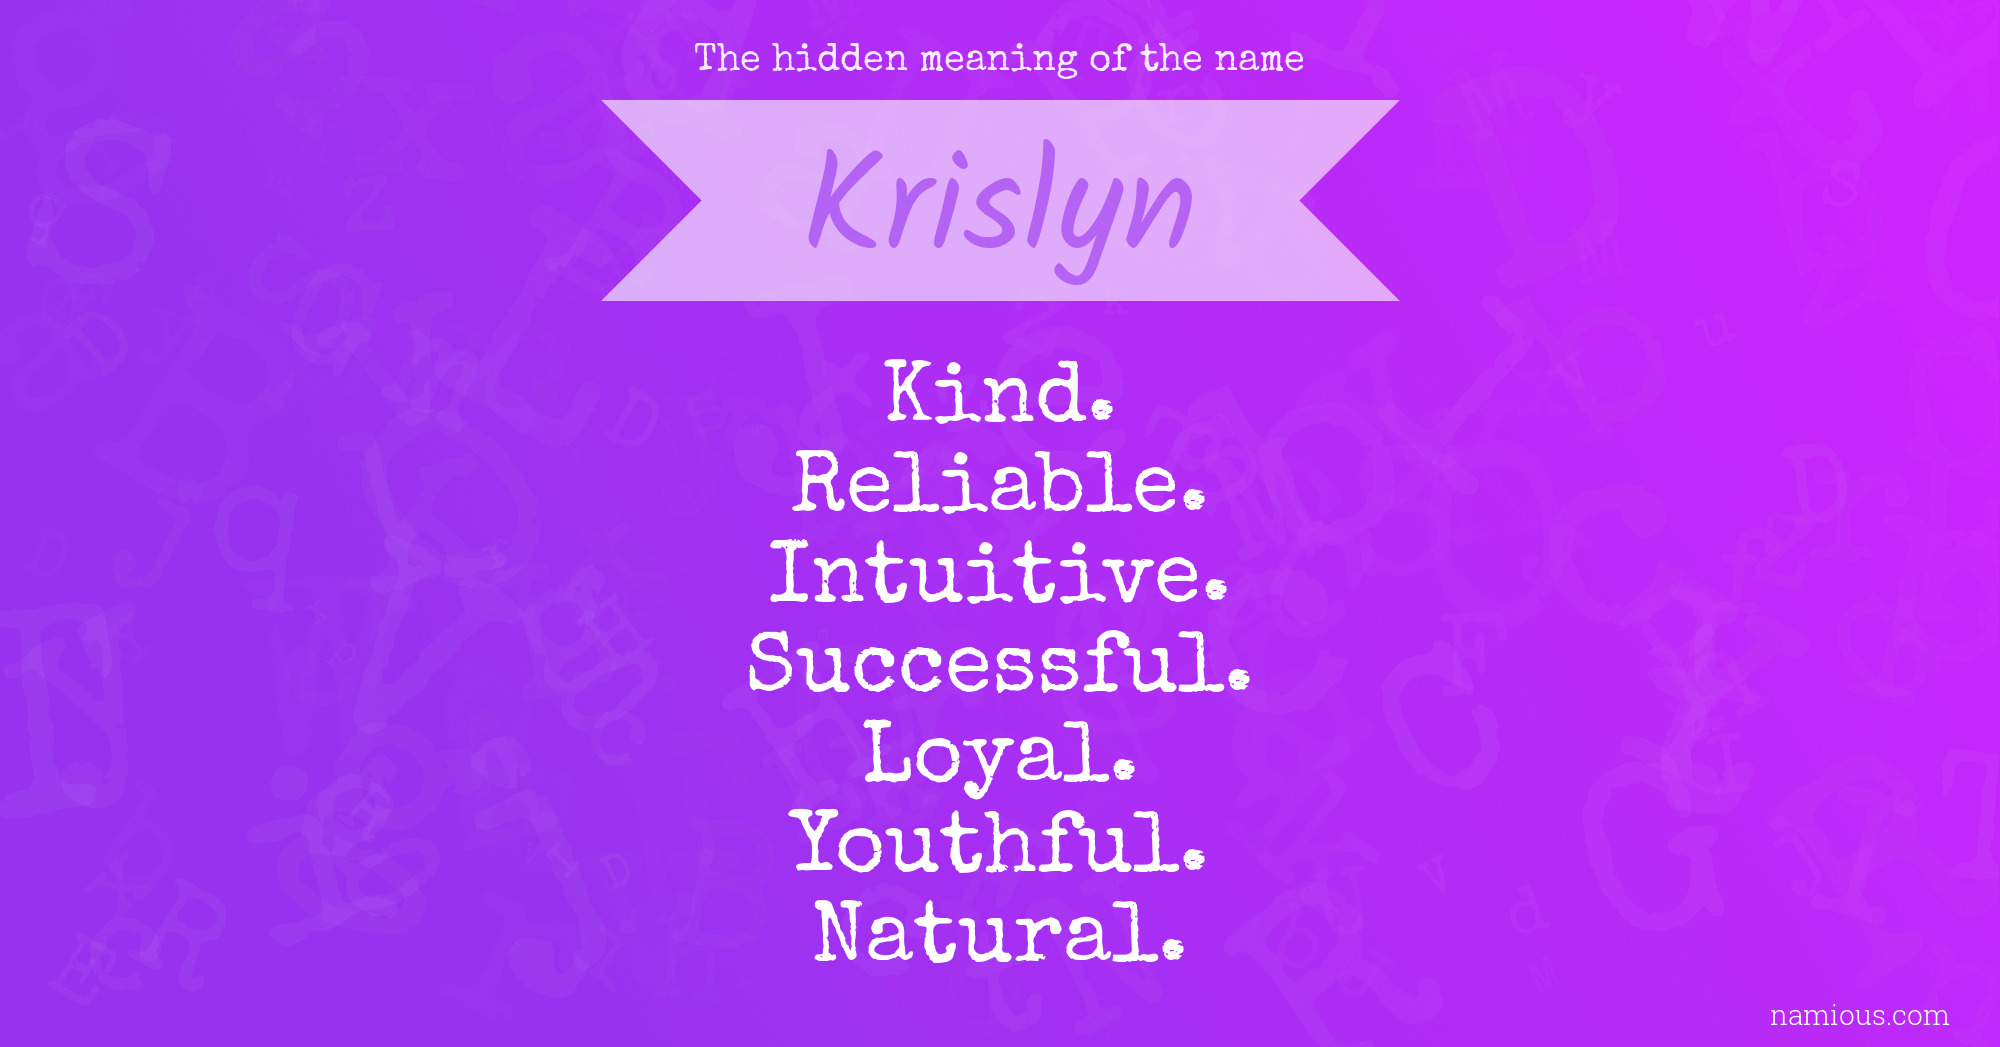 The hidden meaning of the name Krislyn